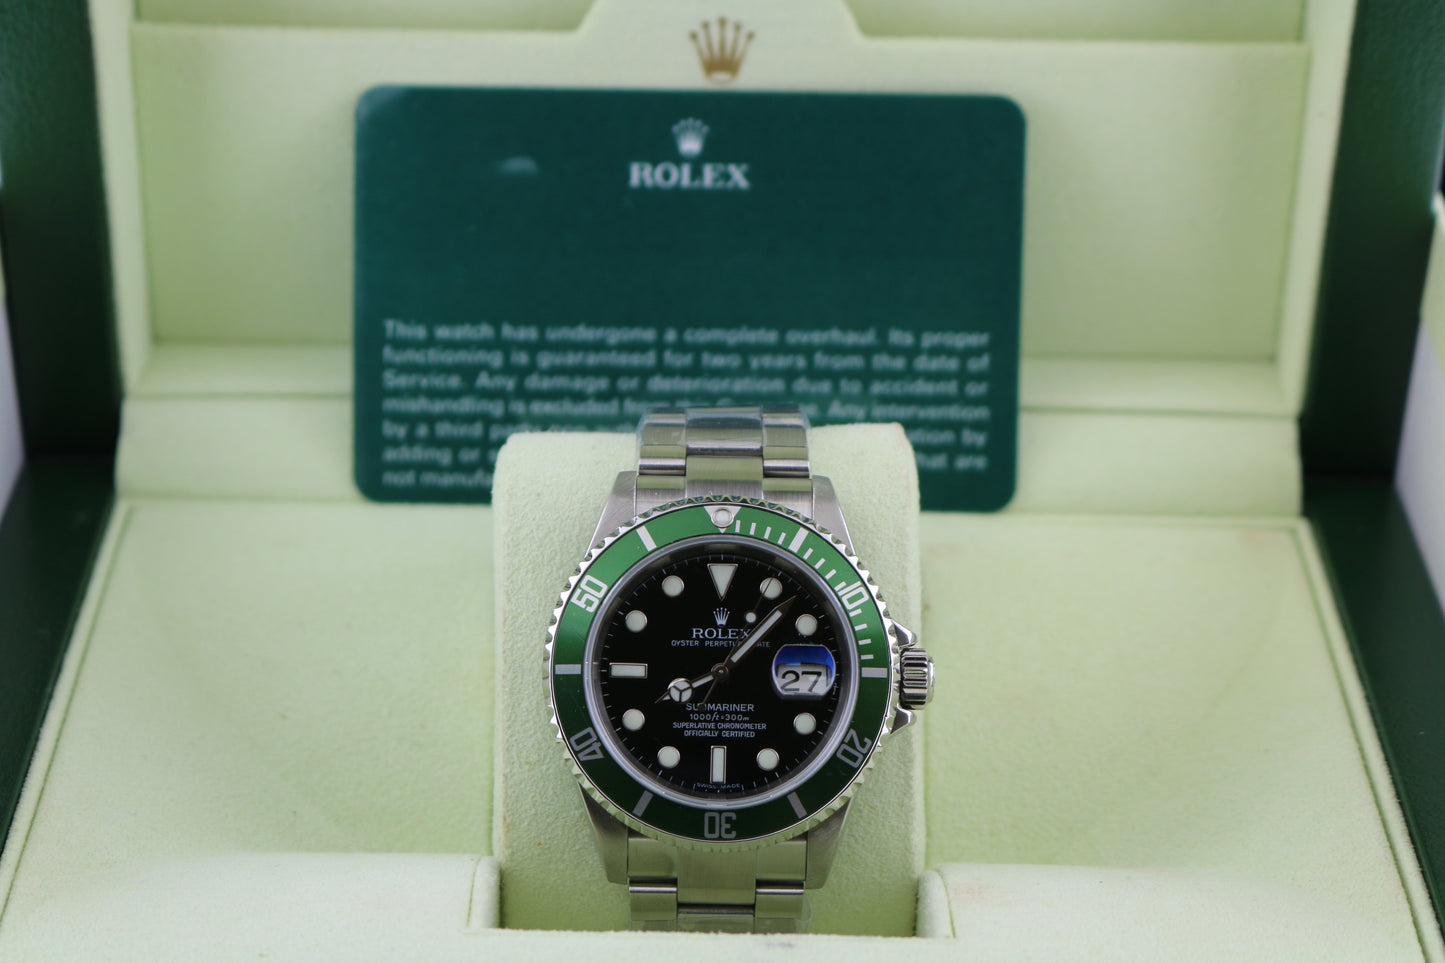 OH Rolex 2006 Submariner 16610 LV Kermit Oyster W/ Rsc Papers 40mm